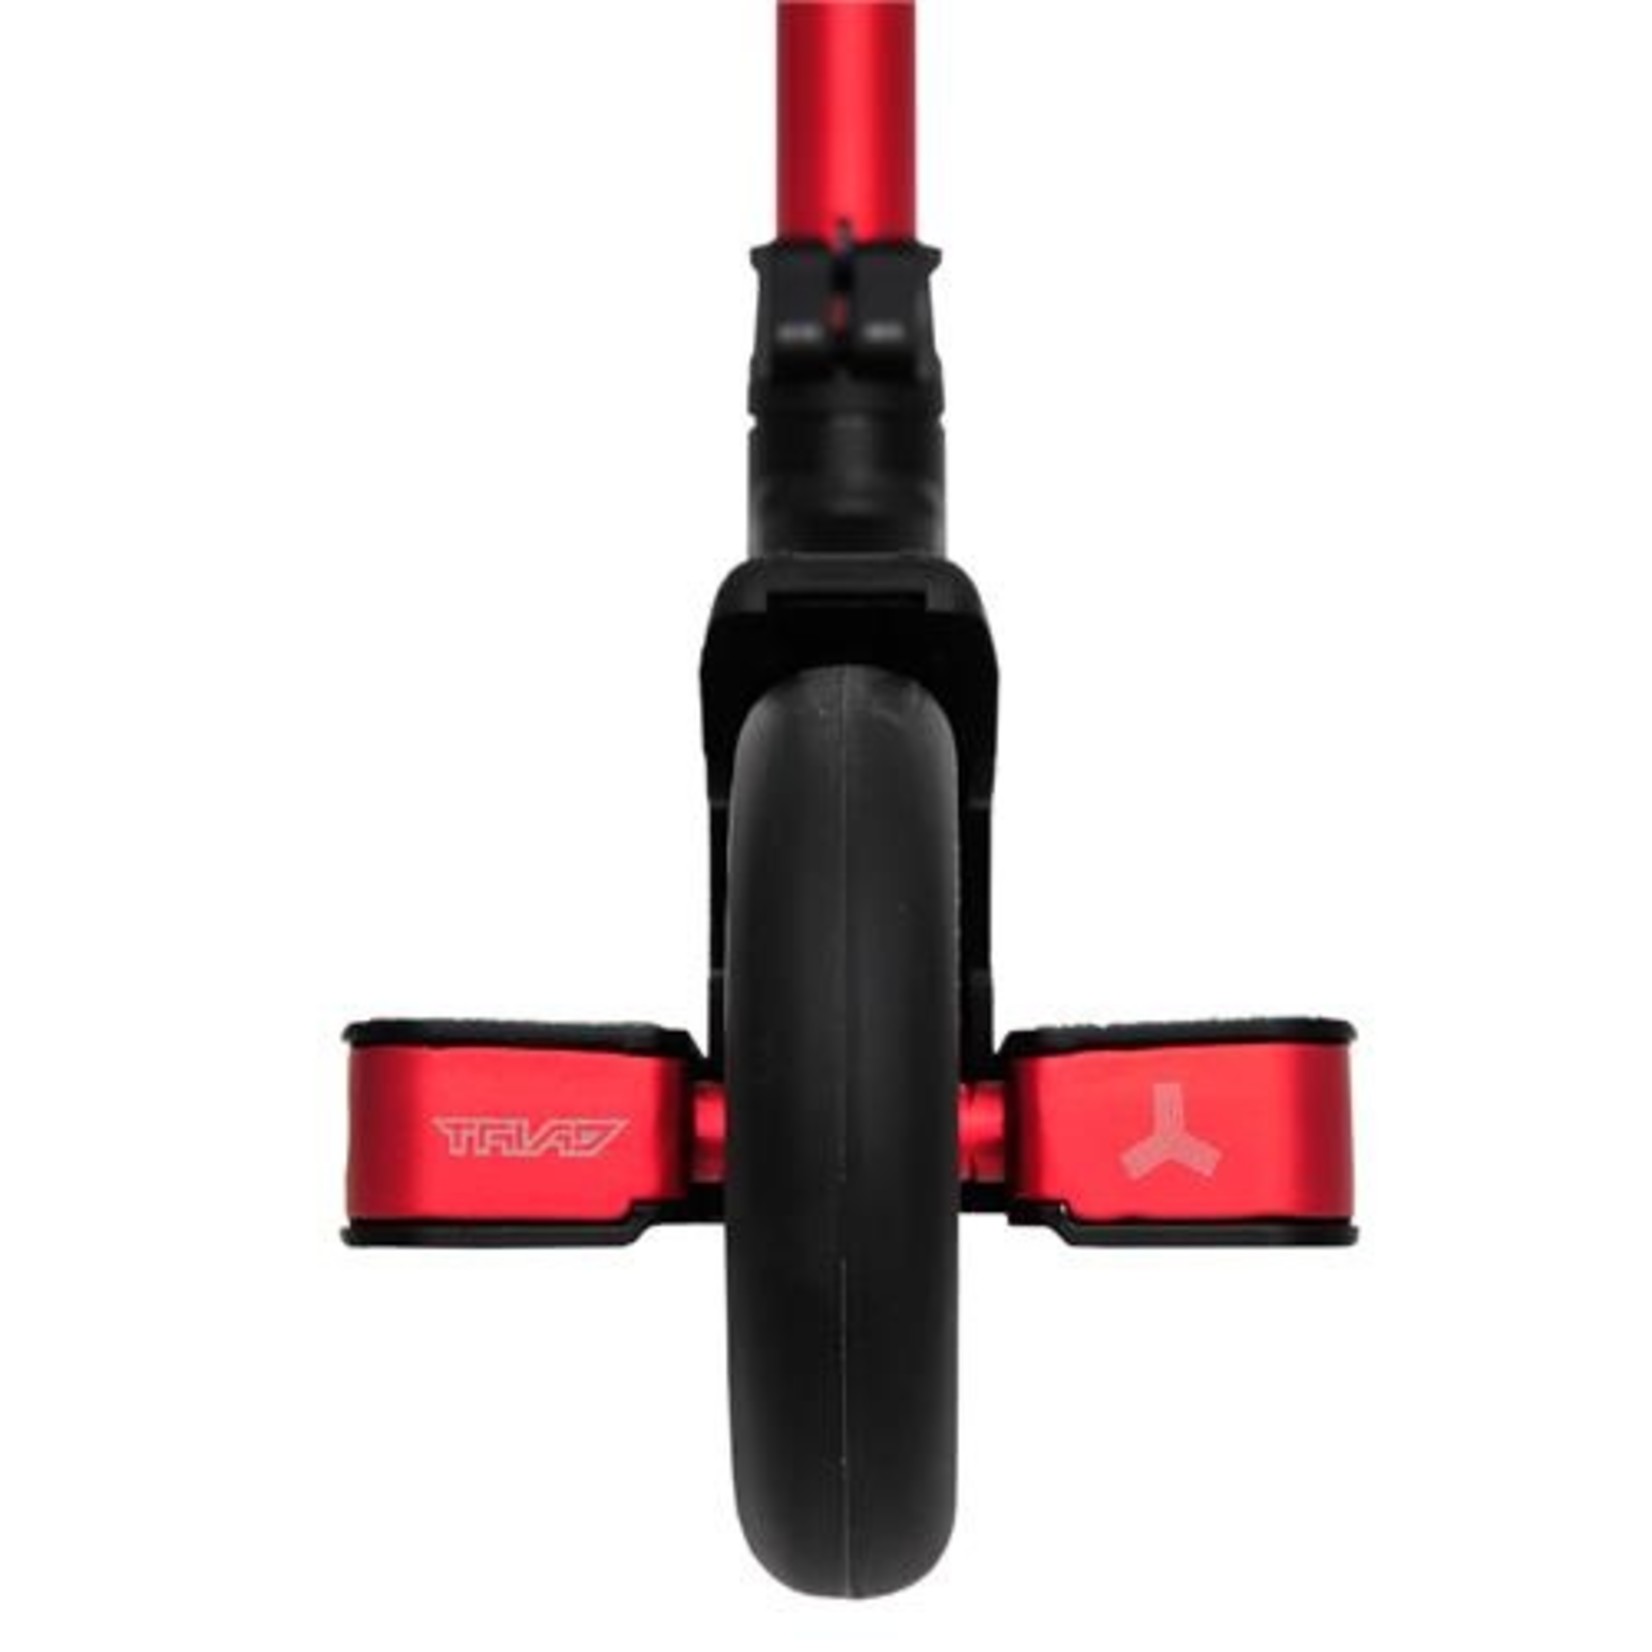 Triad Triad Scooter Delinquent - Satin Black/Red - Large - "Special"